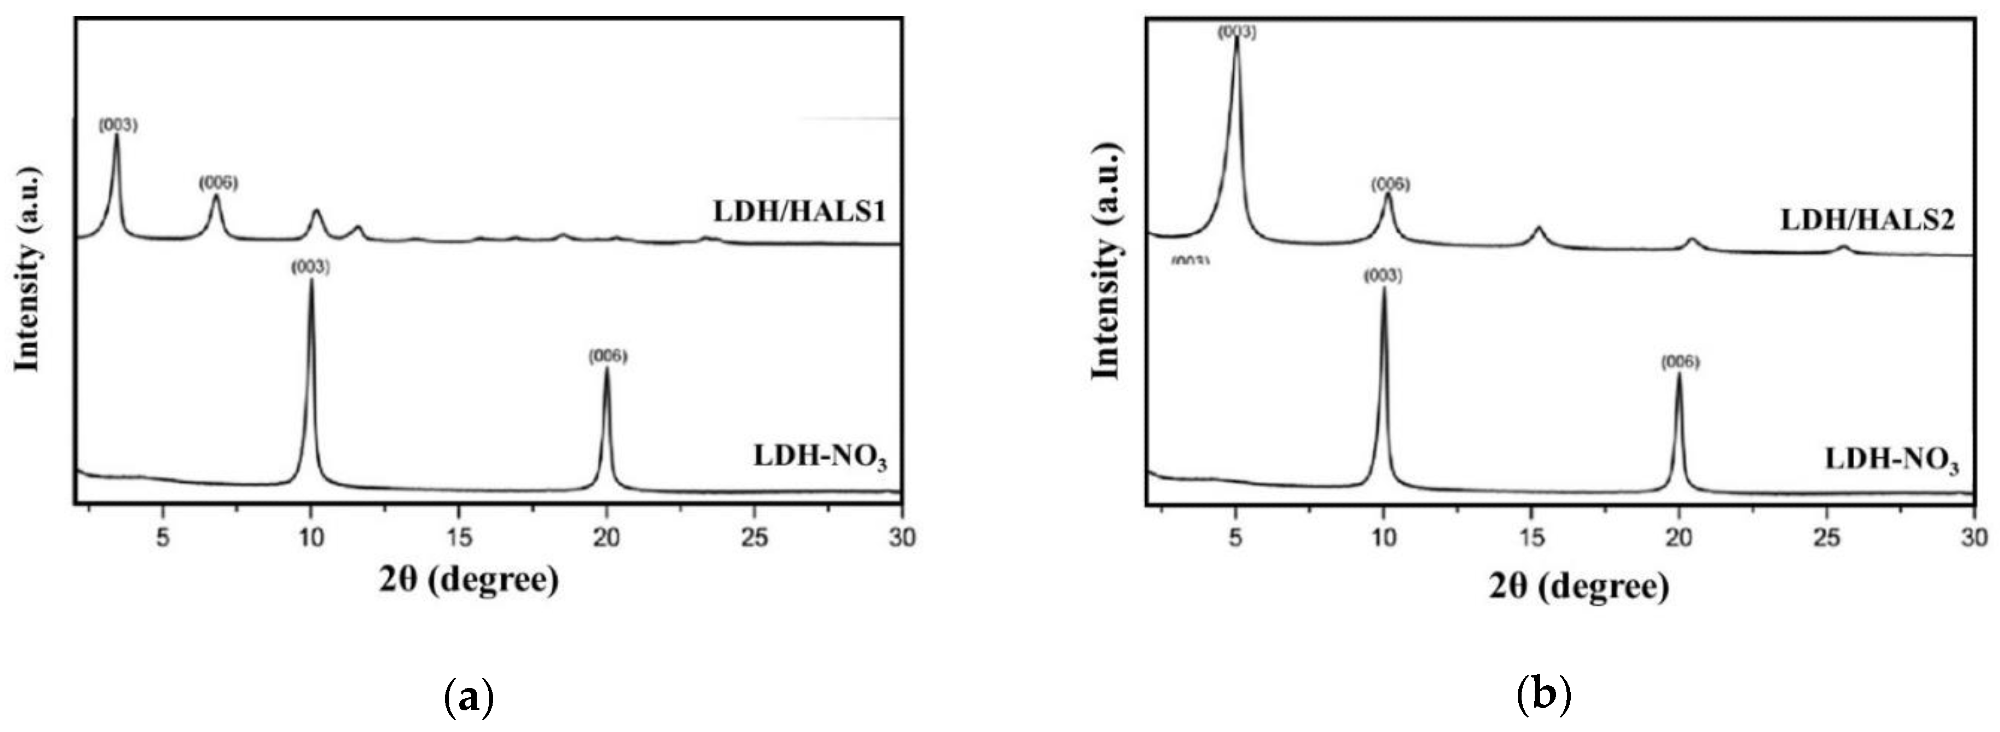 WAXD patterns of (a) LDH-HALS1 and (b) LDH-HALS2 in comparison to the pattern of LDH-NO3.